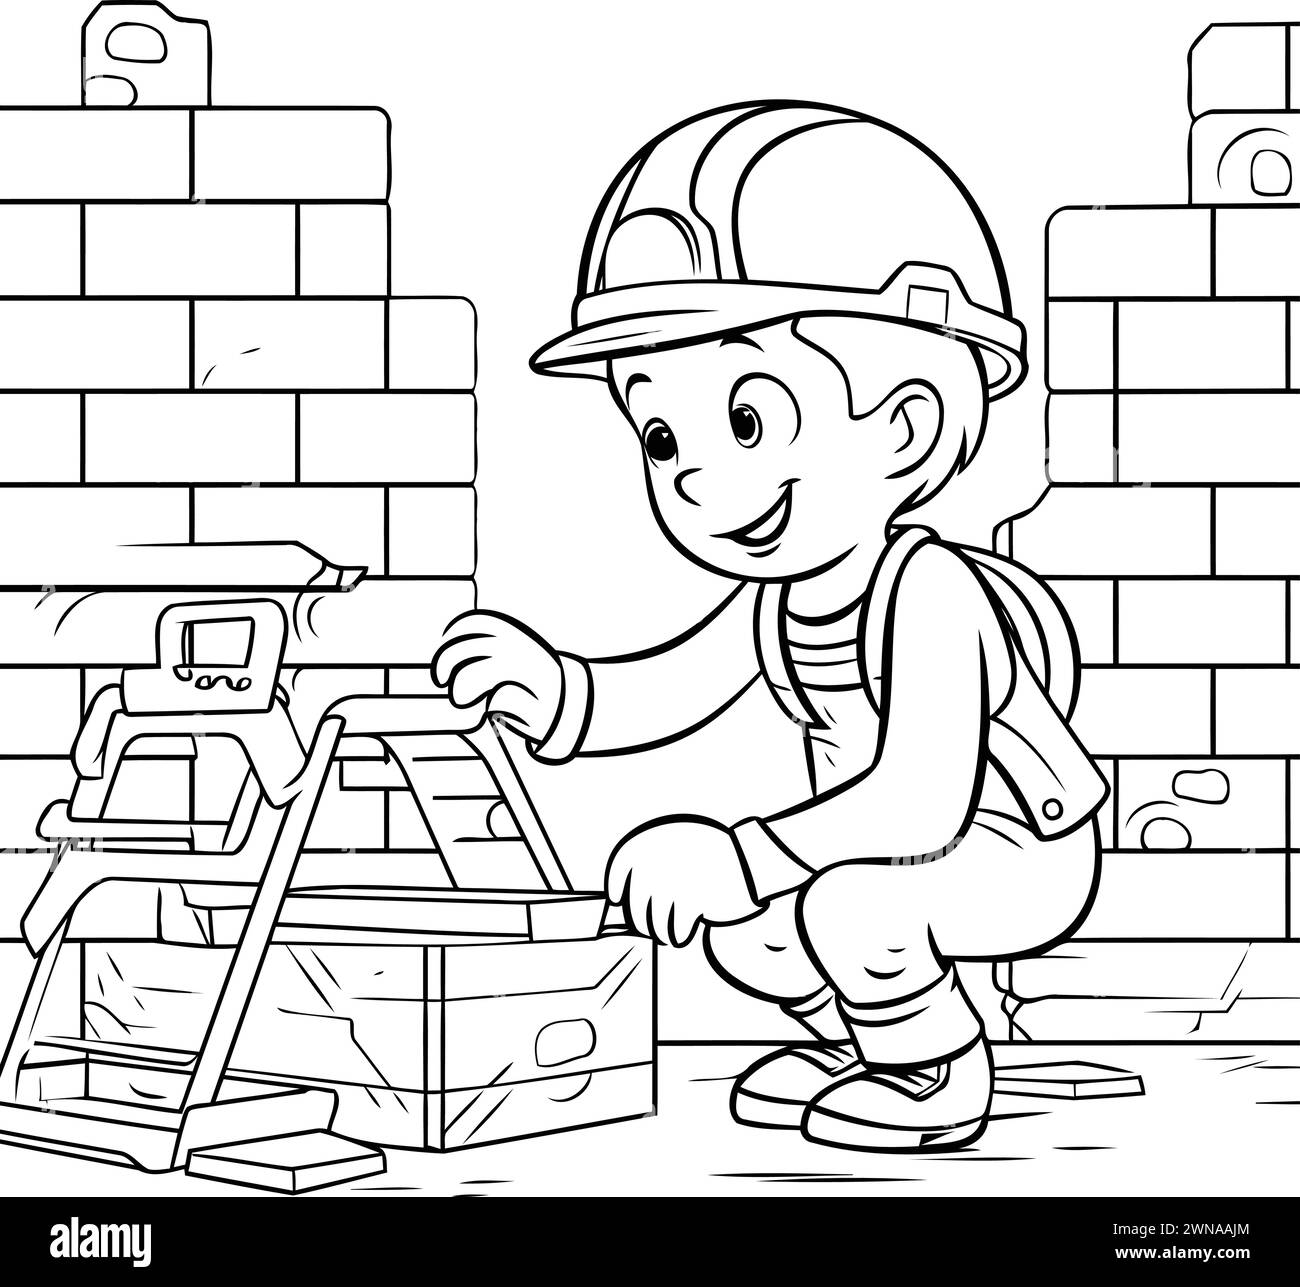 Illustration of a Kid Boy Building a Brick Wall - Coloring Page Stock Vector